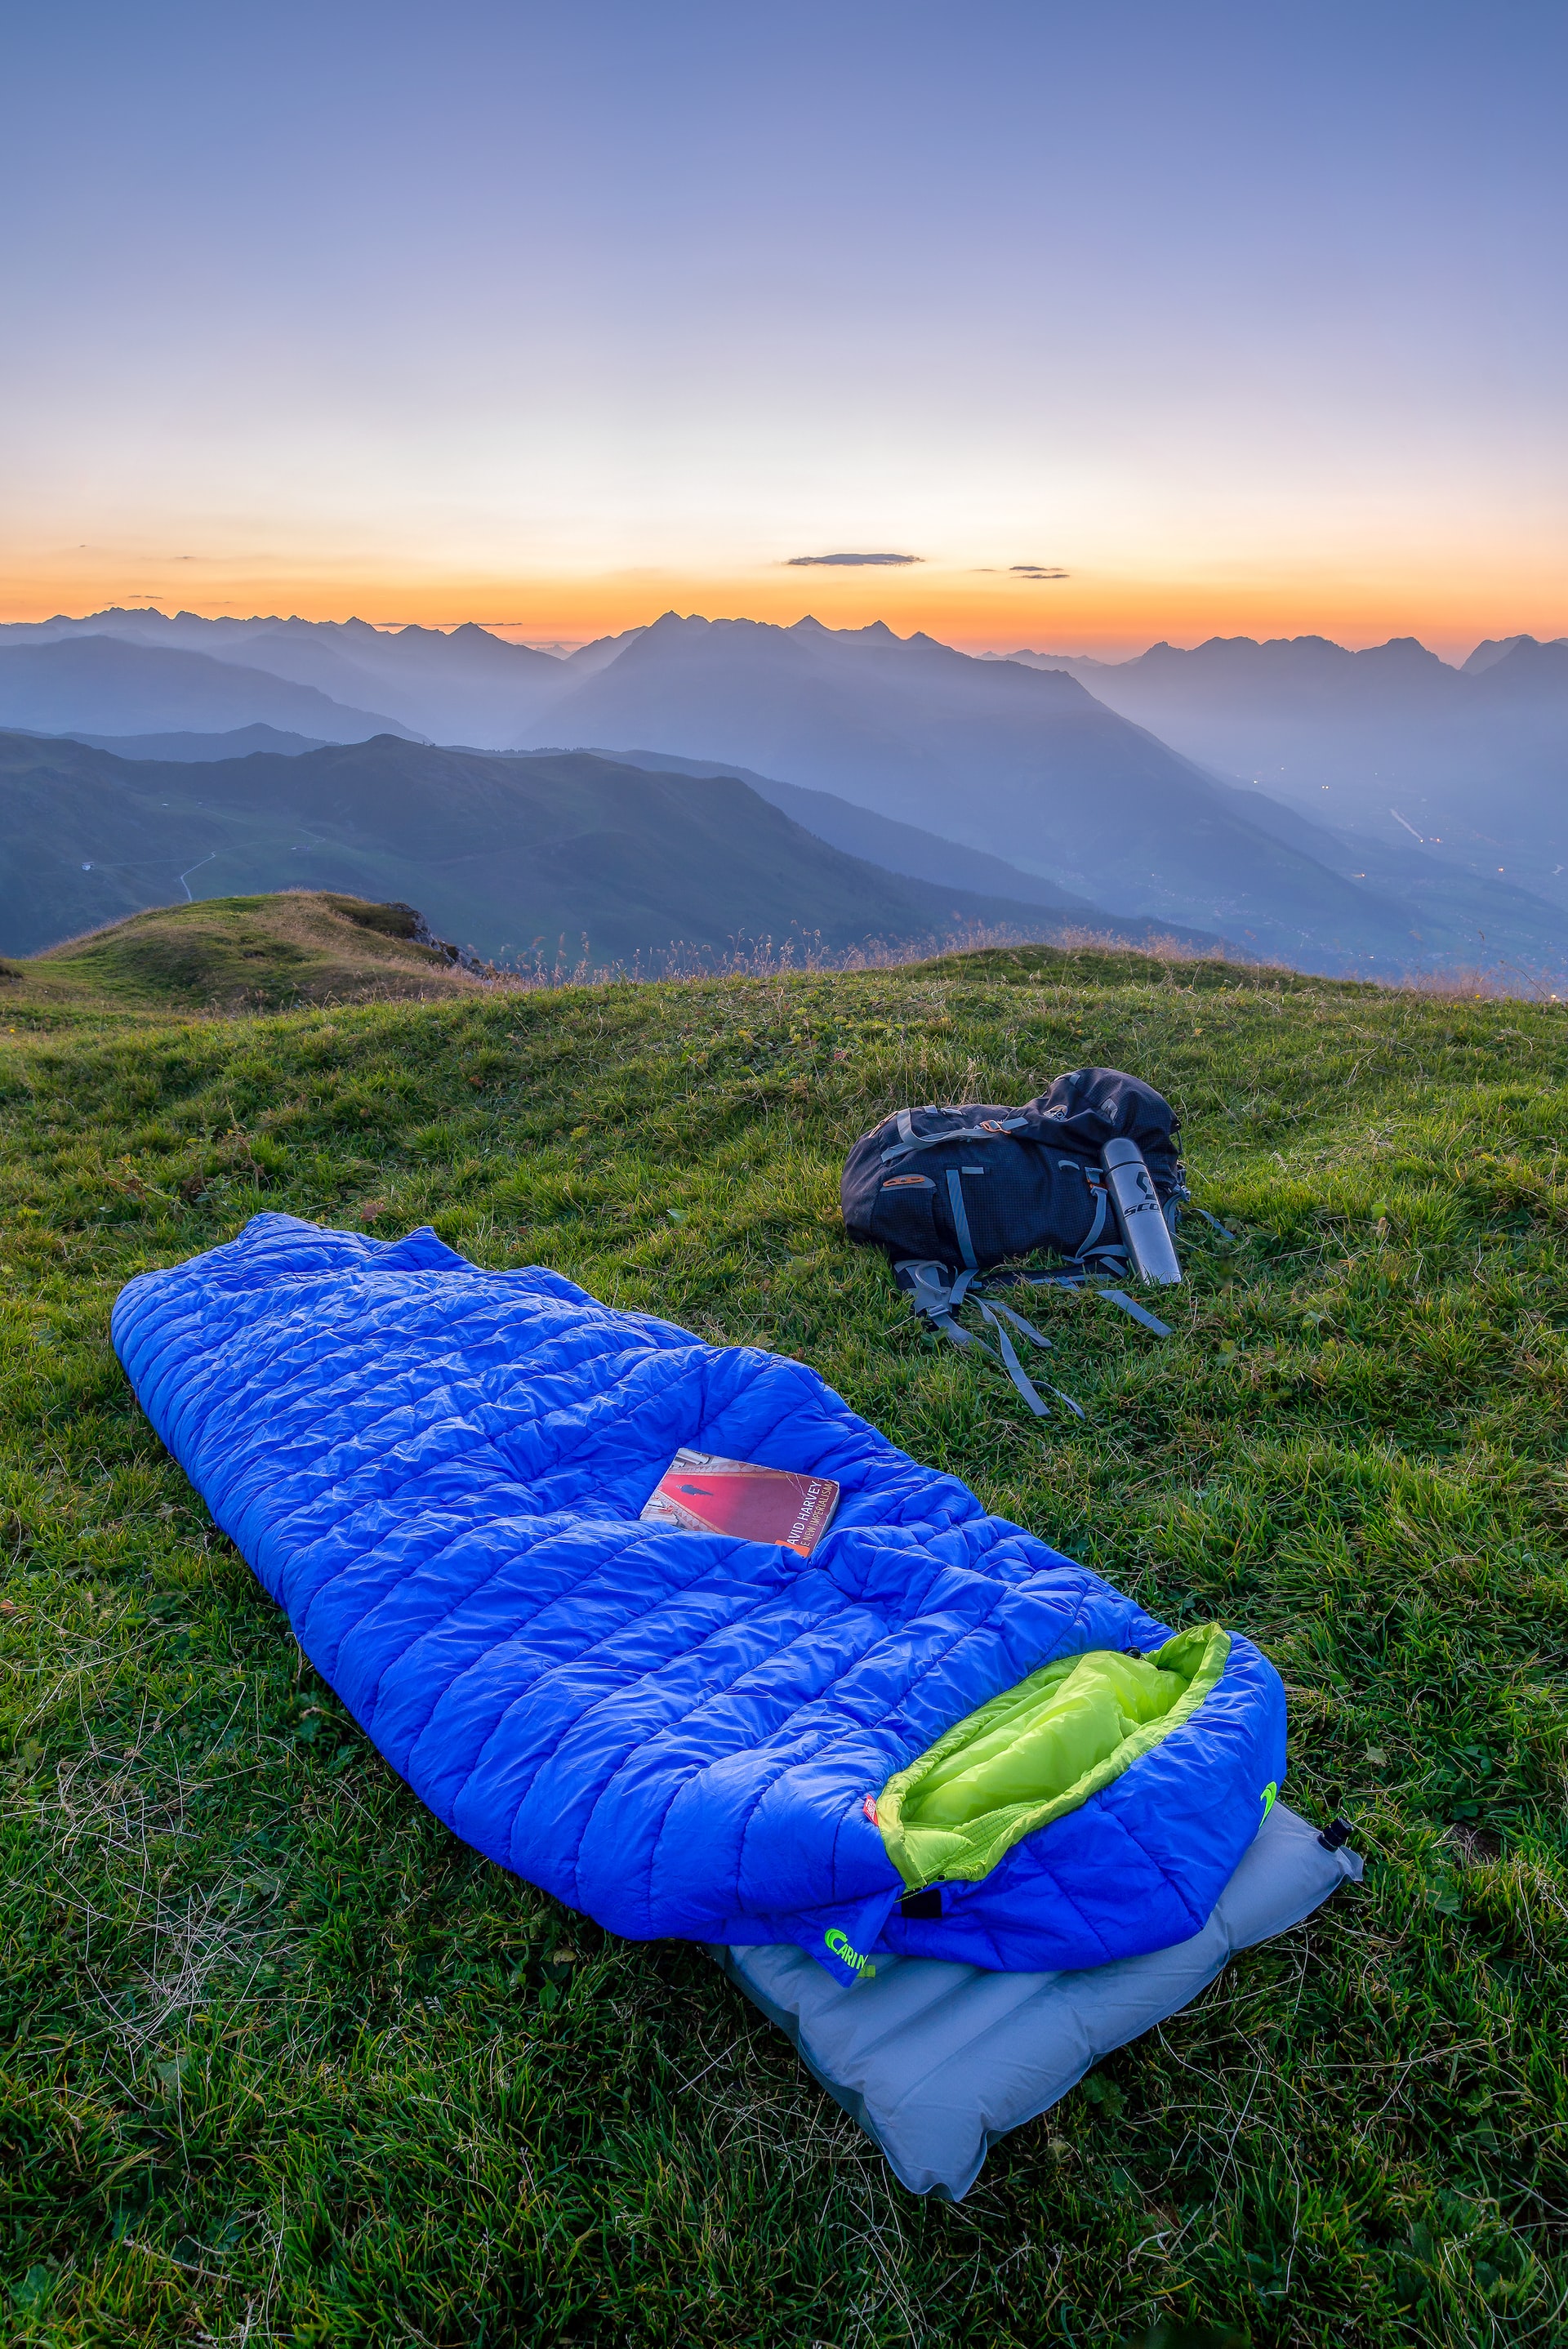 Sleeping Bags - A Guide To Staying Warm And Cozy